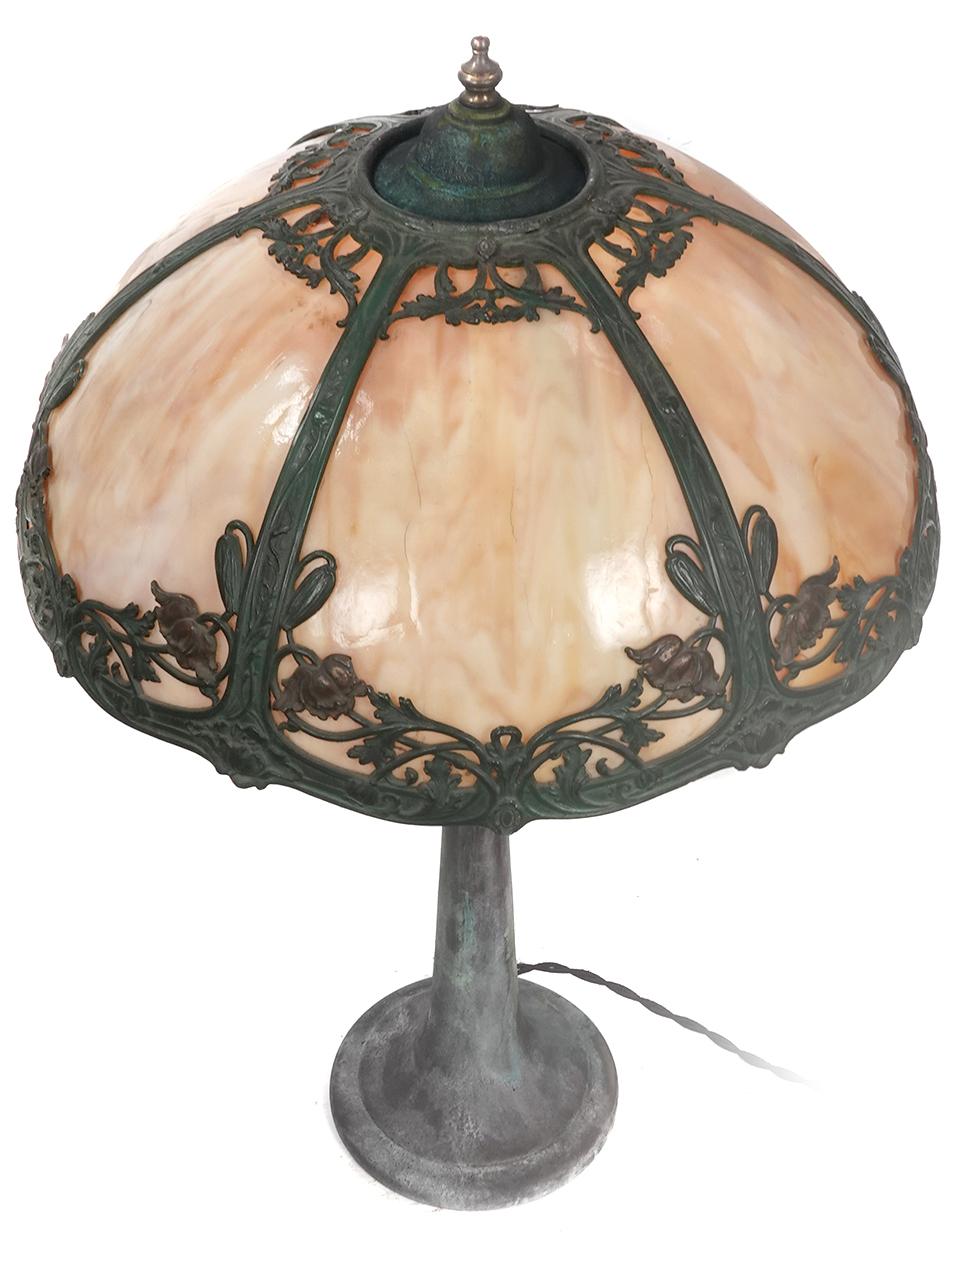 This Art Nouveau table lamp is in the manner of Bradley & Hubbard and offers a slag glass paneled shade with filigree floral details. The glass gives off a nice warm glow.